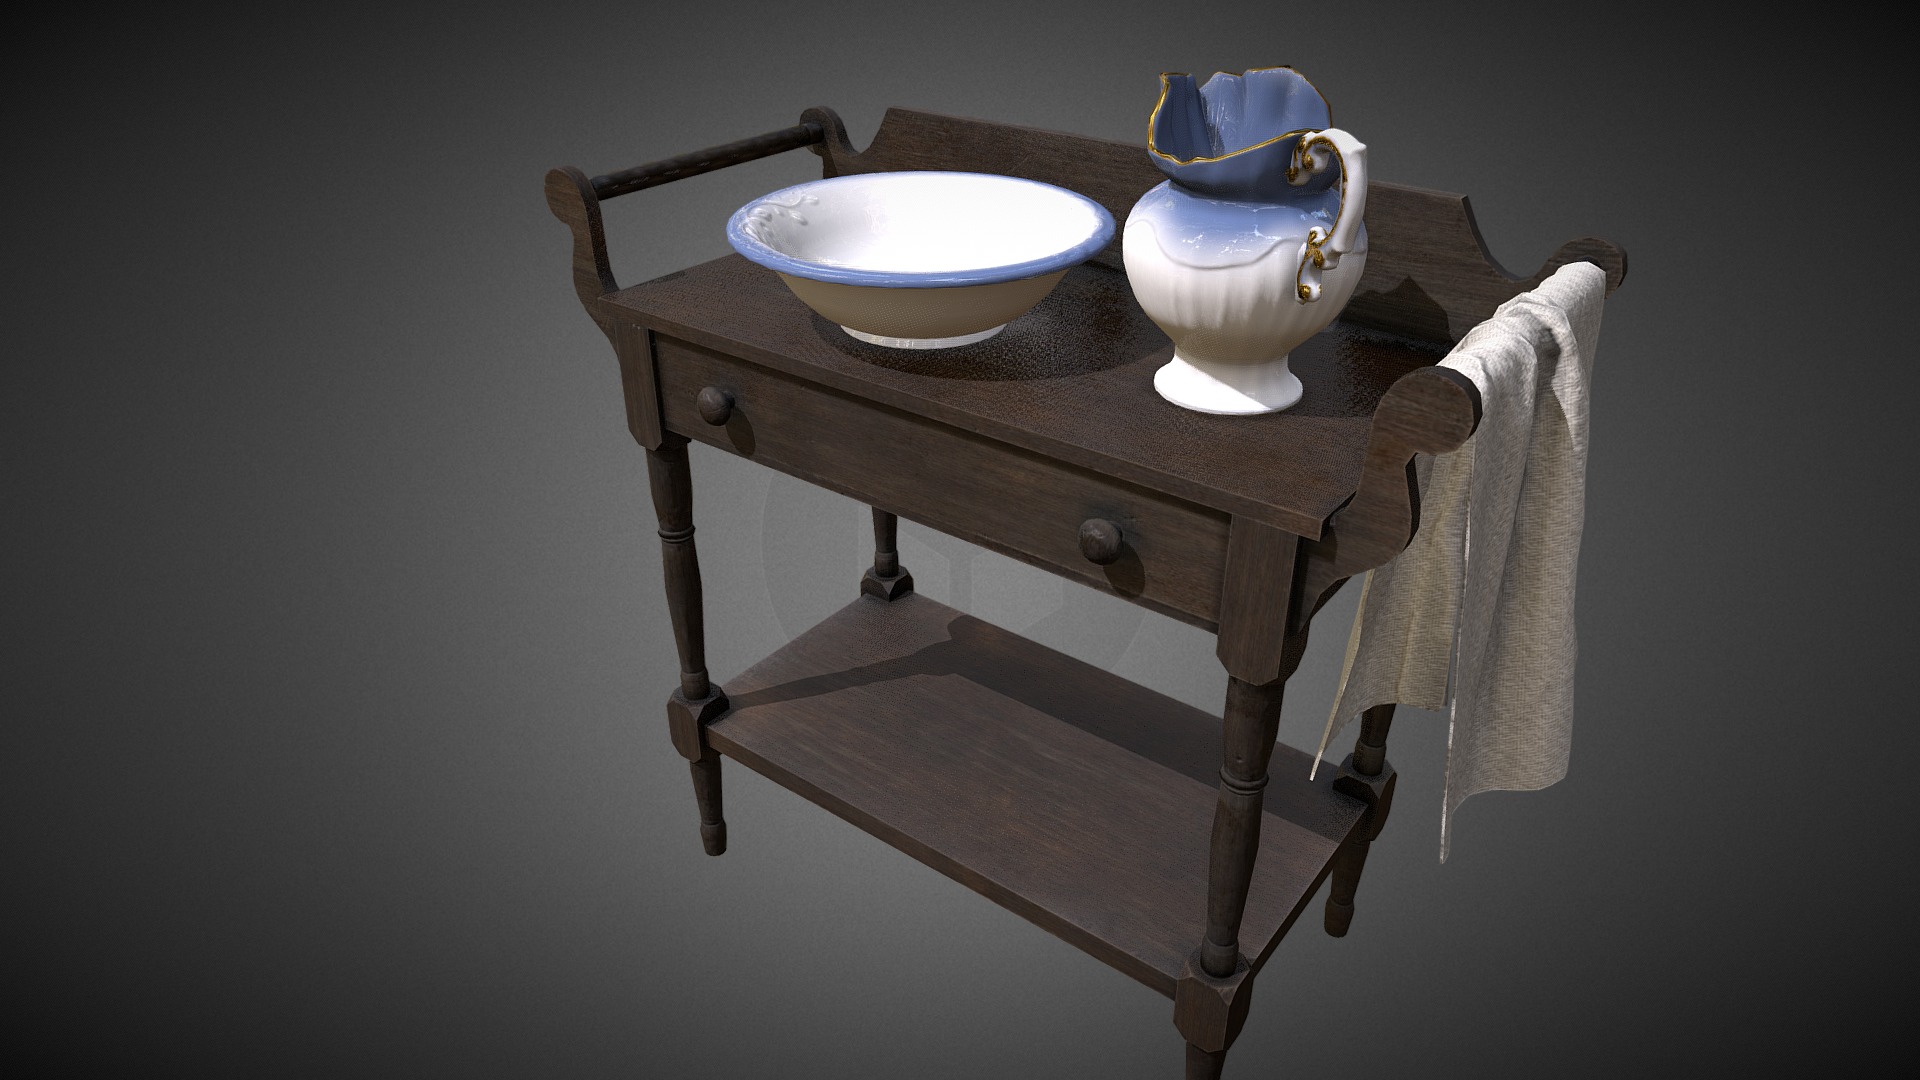 3D model Washbasin - This is a 3D model of the Washbasin. The 3D model is about a wooden table with a bowl and a teapot on it.